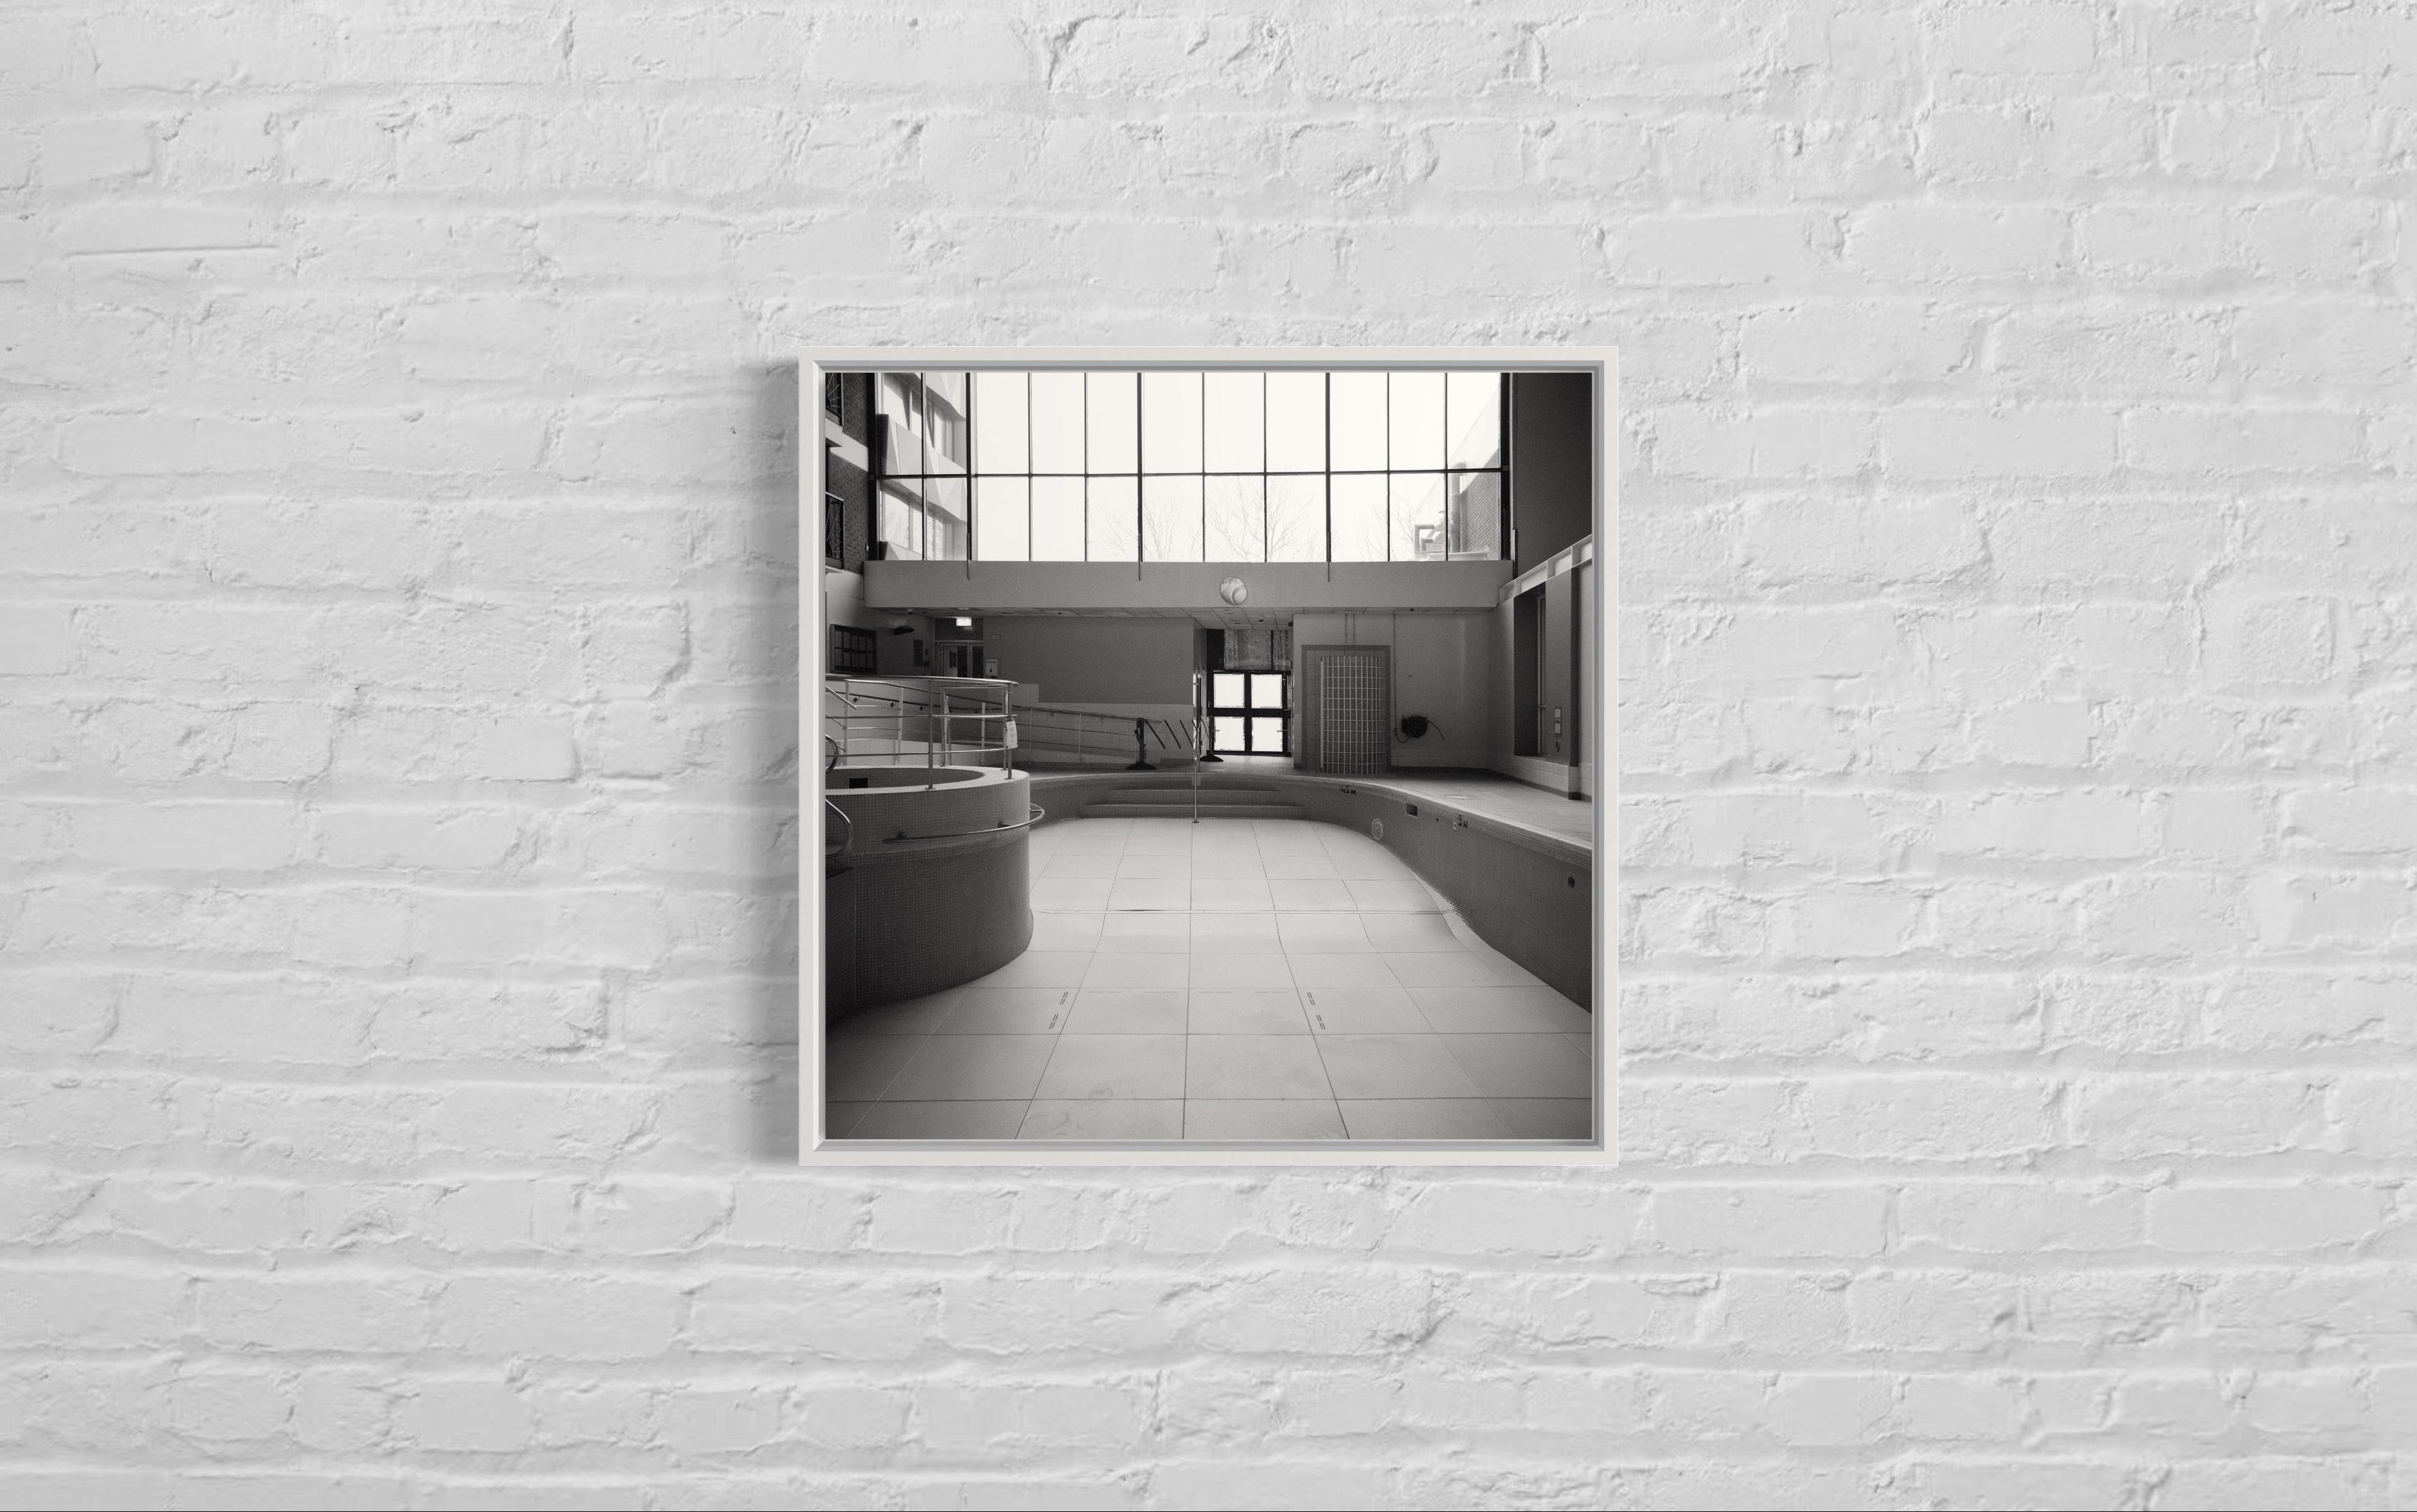 Monochrome Square Architecture Photography: Empty Swimming Pool Design. - Gray Black and White Photograph by Anna Dobrovolskaya-Mints